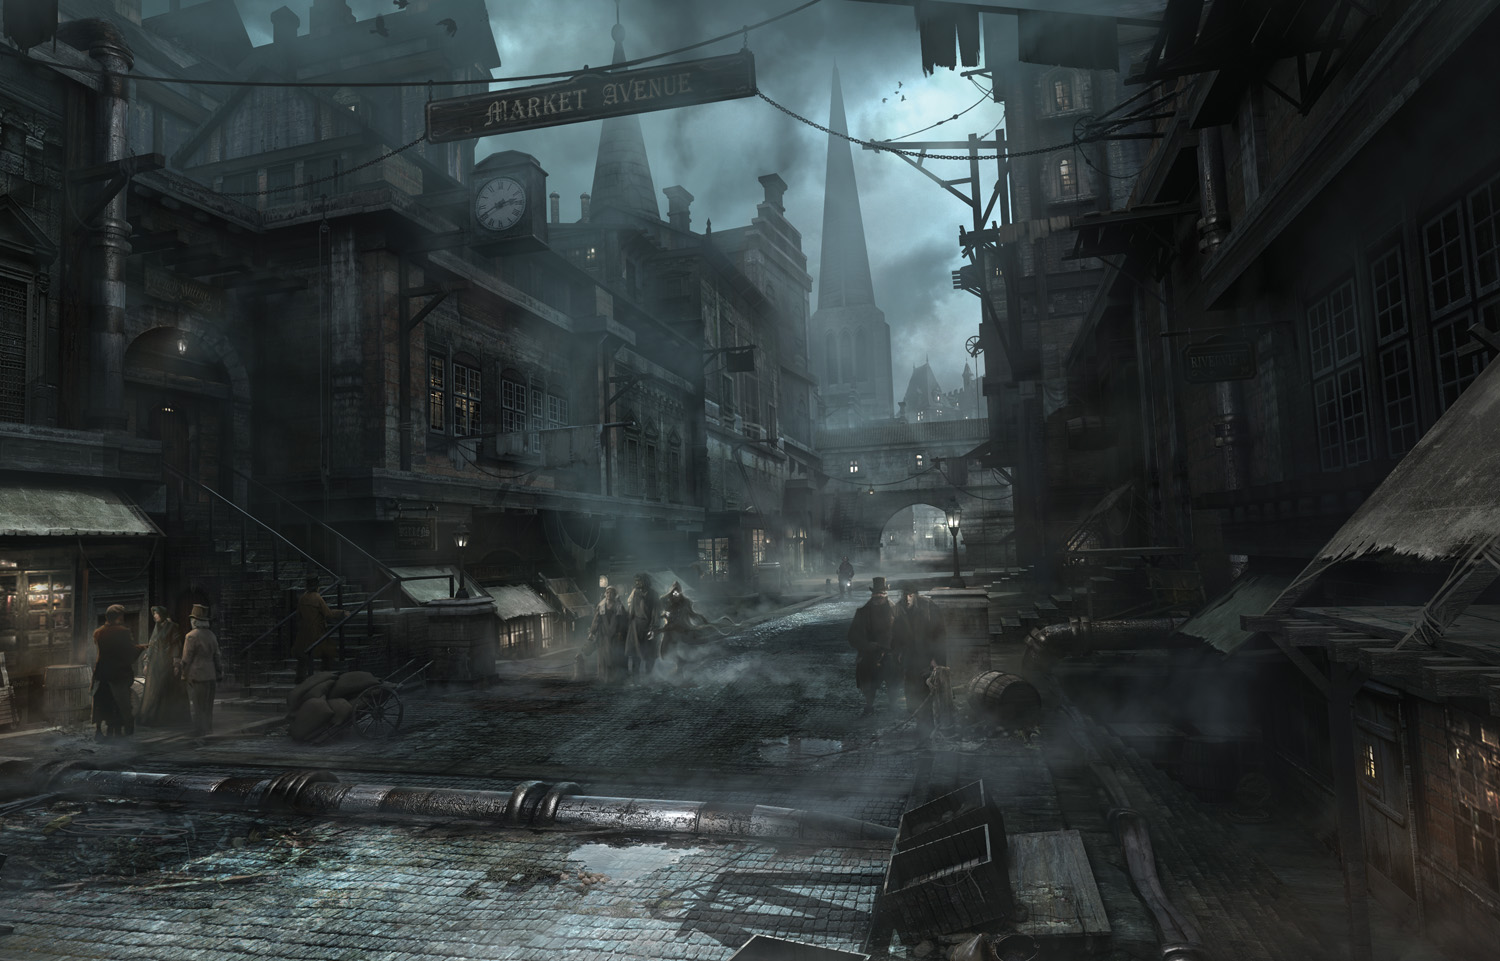 Fine Art: The Very Sneaky Art Of Thief